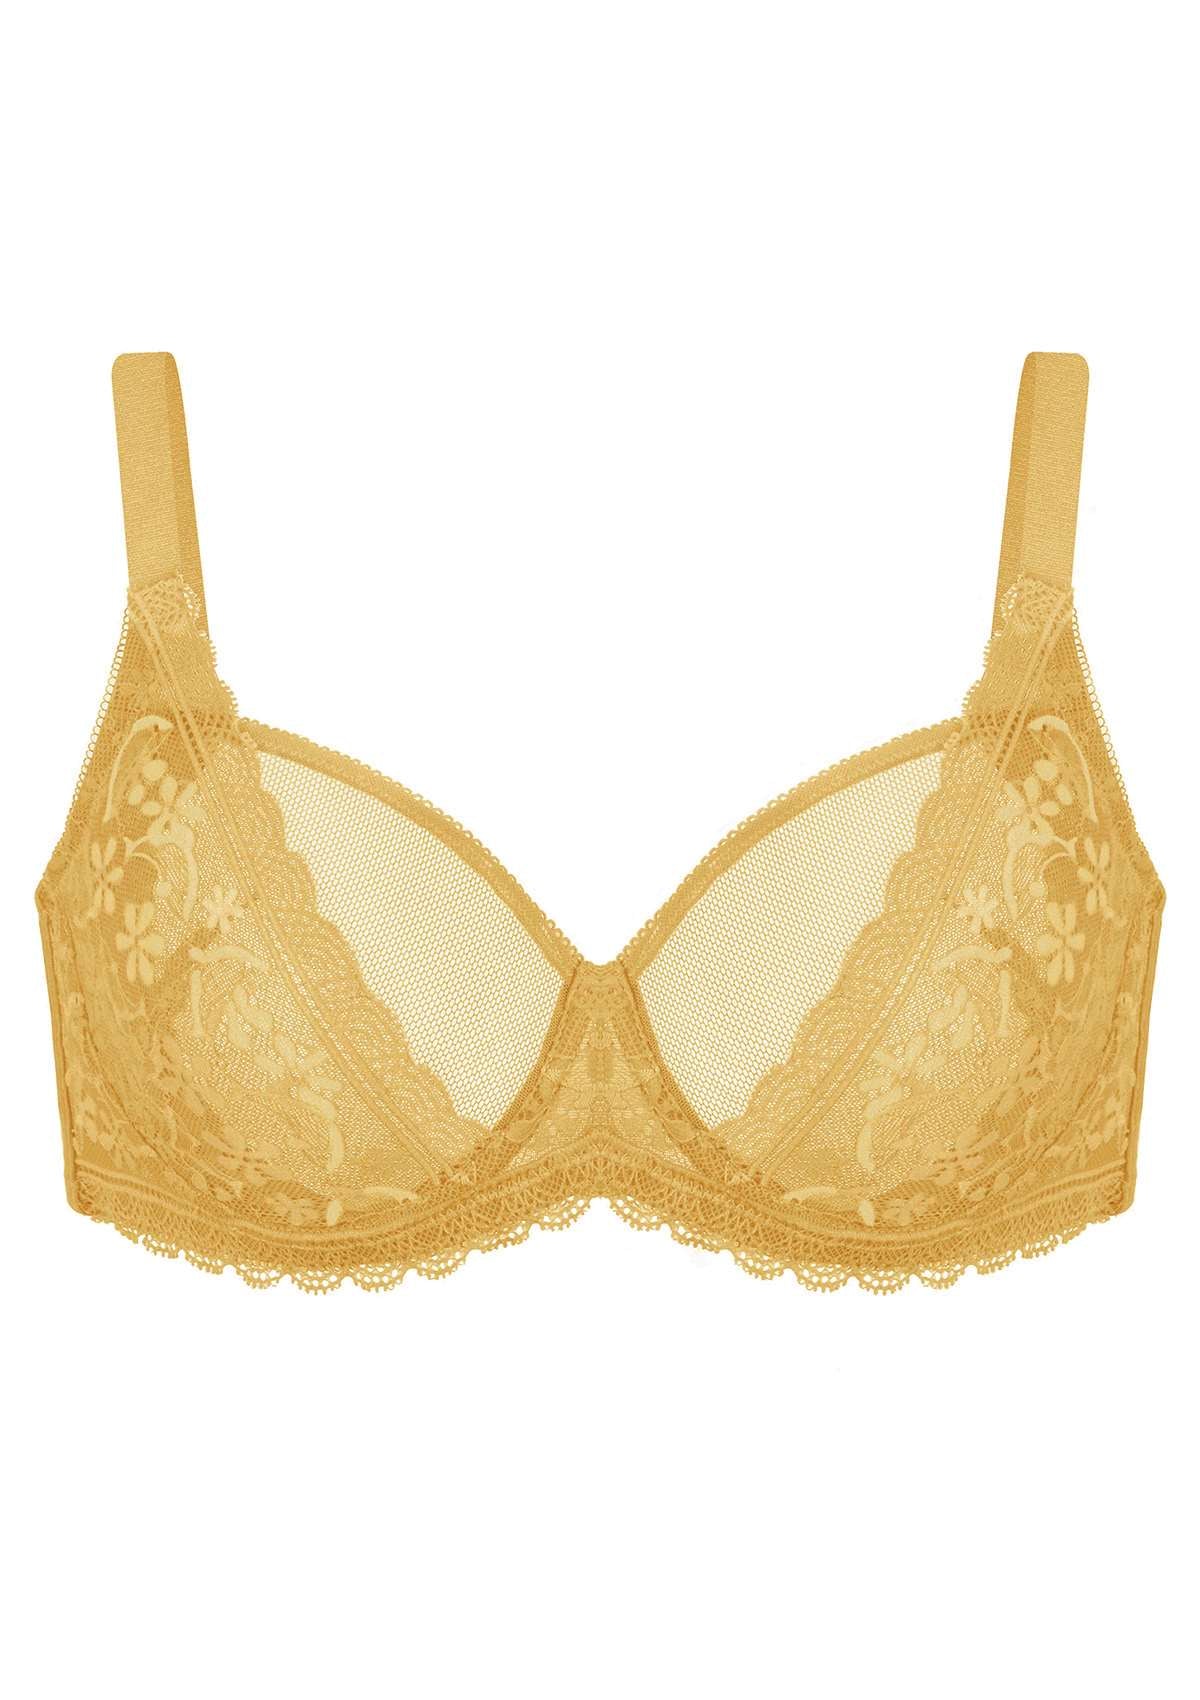 HSIA Anemone Lace Unlined Bra: Supportive, Lightweight Bra - Ginger / 42 / DD/E